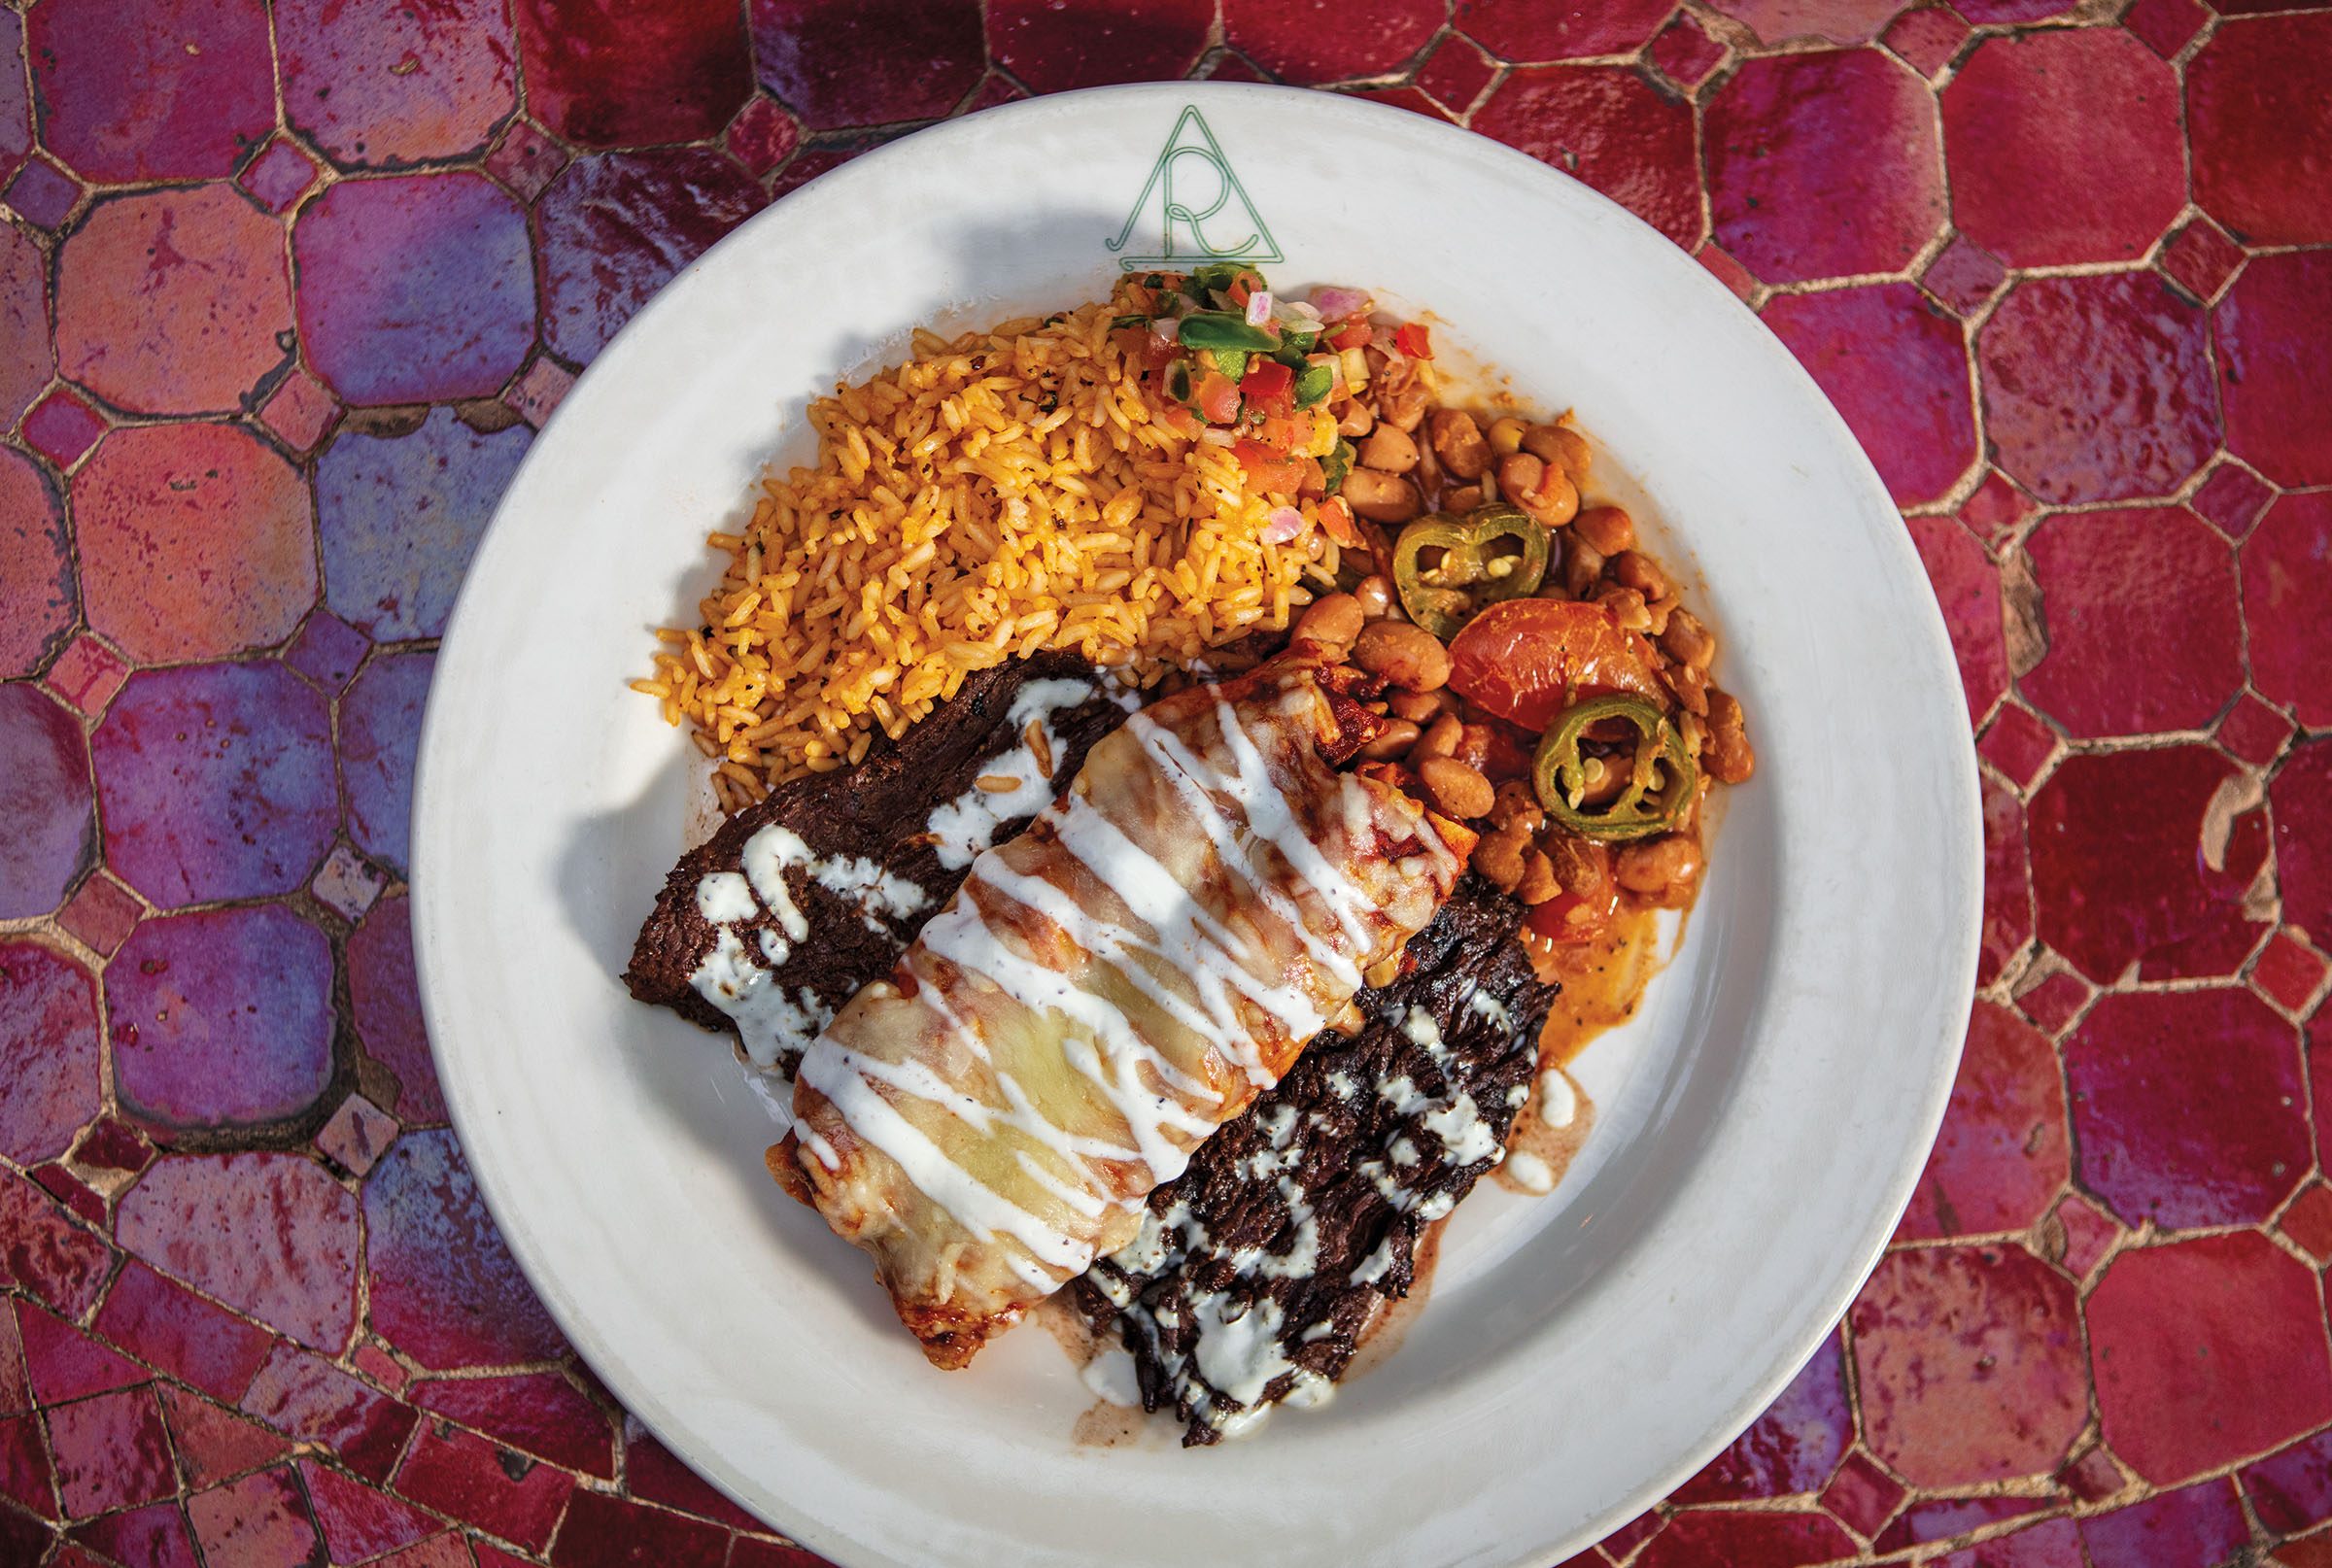 An overhead view of meat, enchilada, rice, and beans on a plate